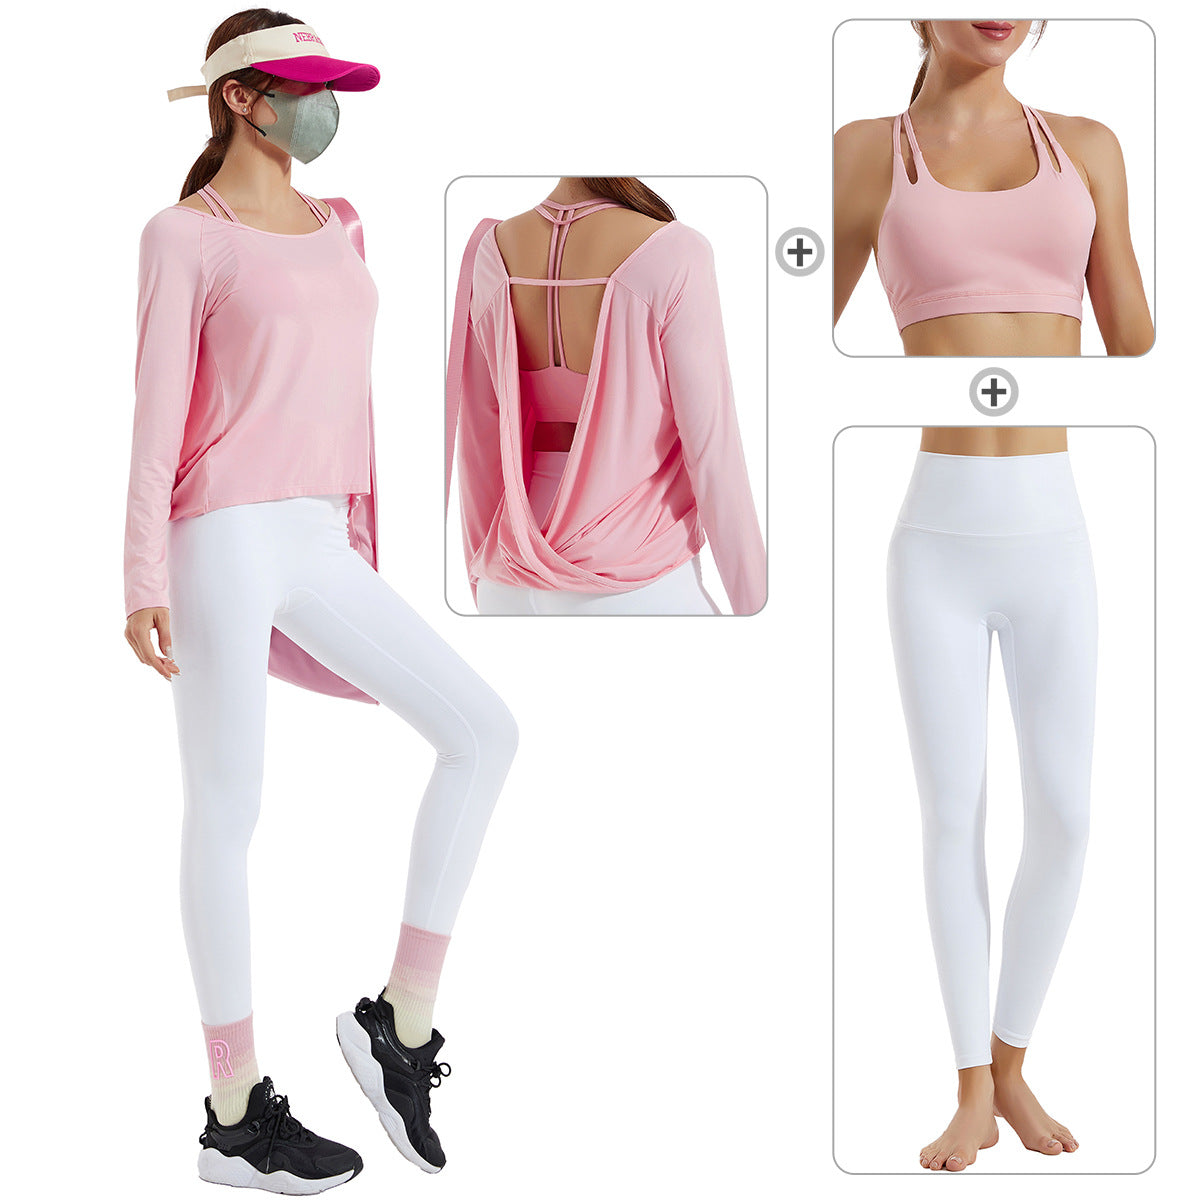 Fitness Suit Women Nude Push up Sports Underwear Running Sports Yoga Clothes Three Piece Set